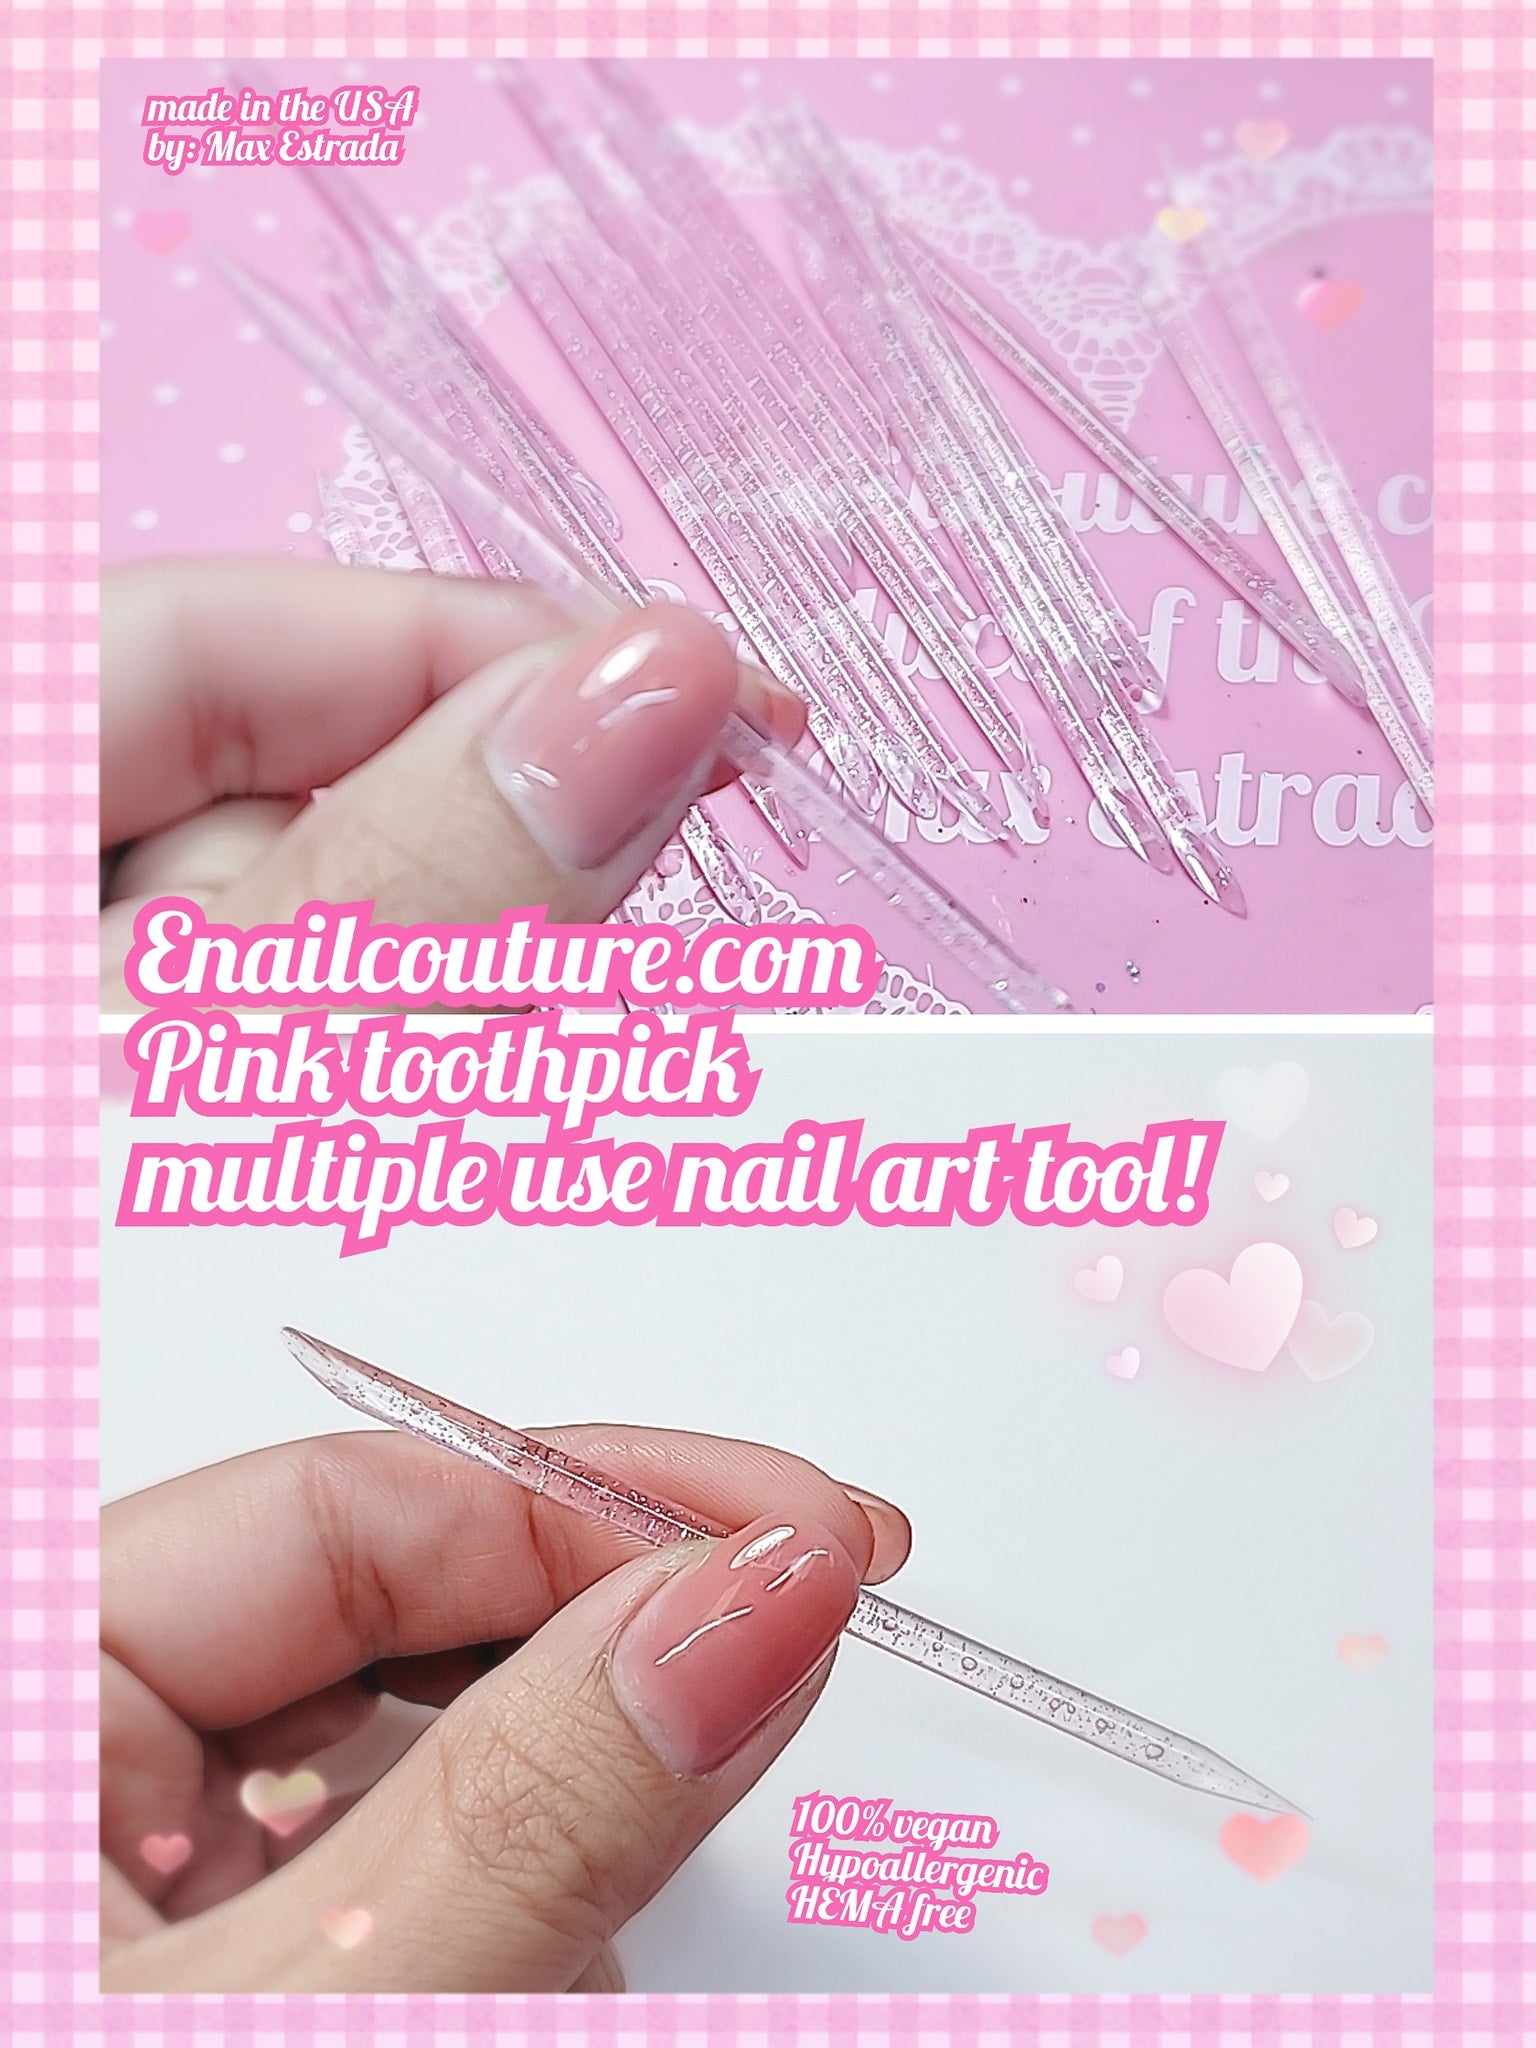 pink toothpick (100 PCS Disposable Nail Stick Cuticle Pusher bulk, Nail Care Sticks, Cuticle Manicure and Pedicure Stick for Fingernail, Cleaning Cuticle Stick Pink)